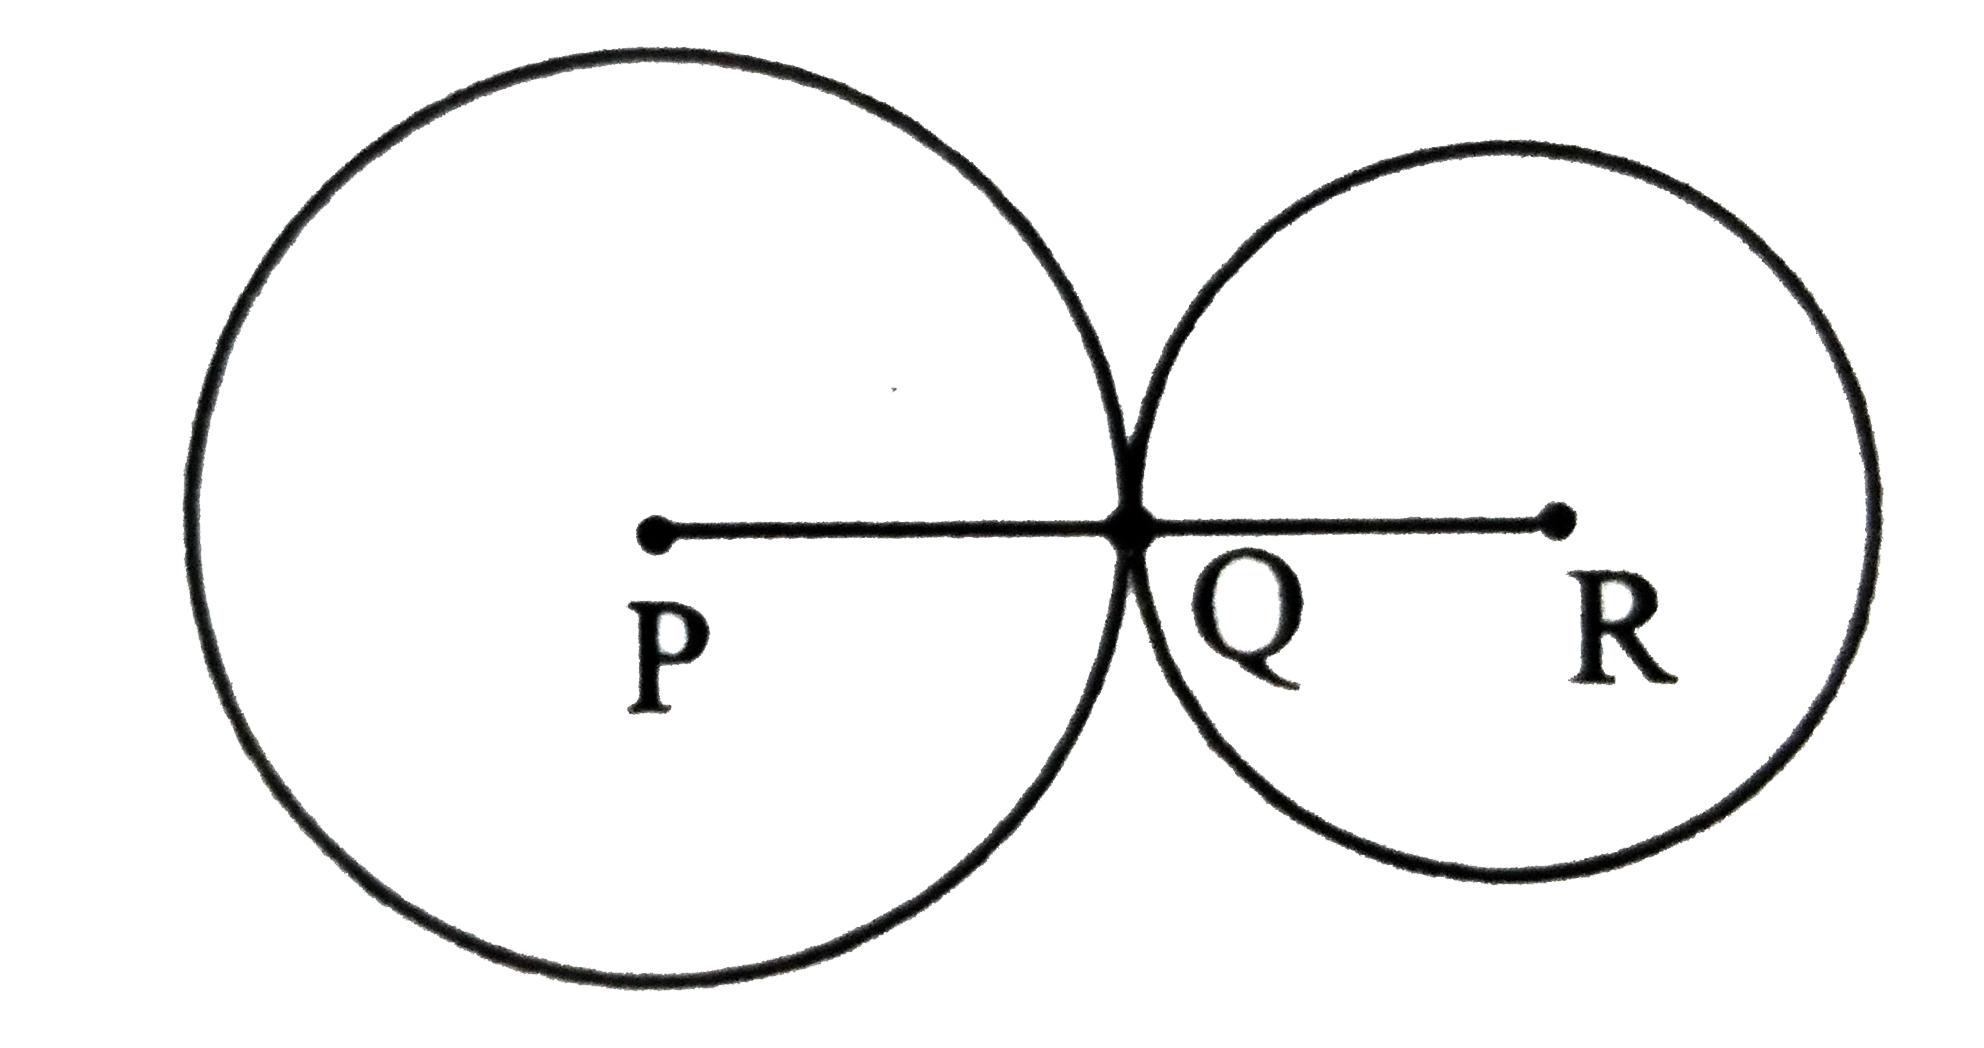 Two circles of radii 5.5cm and 4.2cm touch each other externally.   Find the distance between their centres.